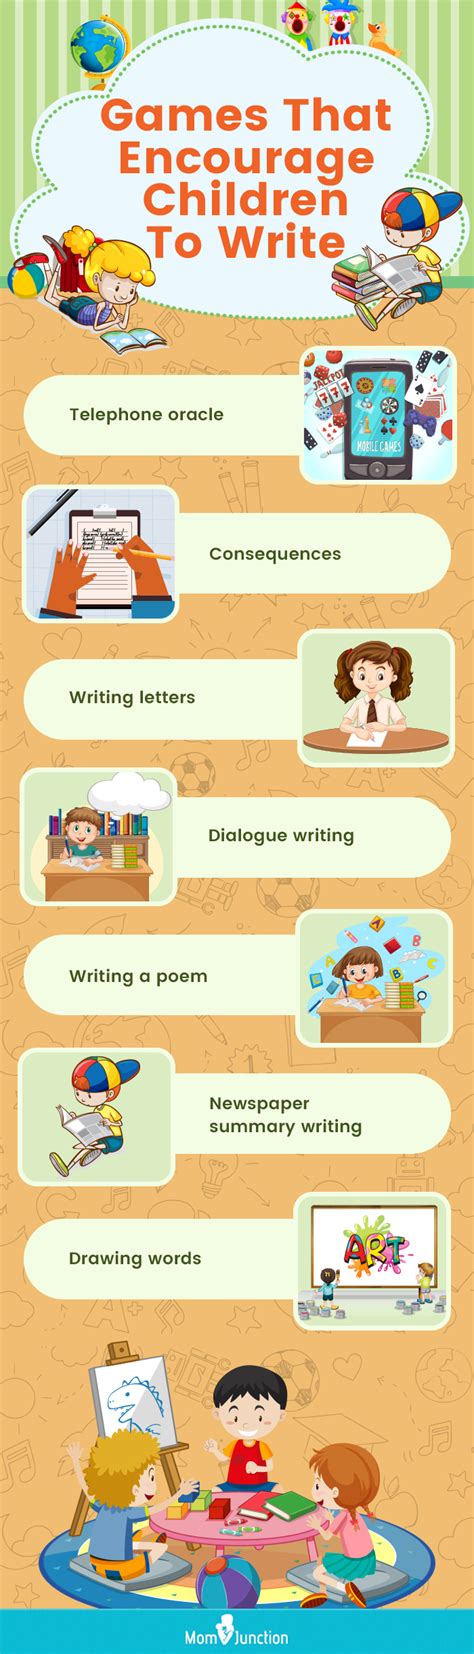 15 Creative Writing Games And Activities For Kids Creative Writing Activities For Kids - Creative Writing Activities For Kids